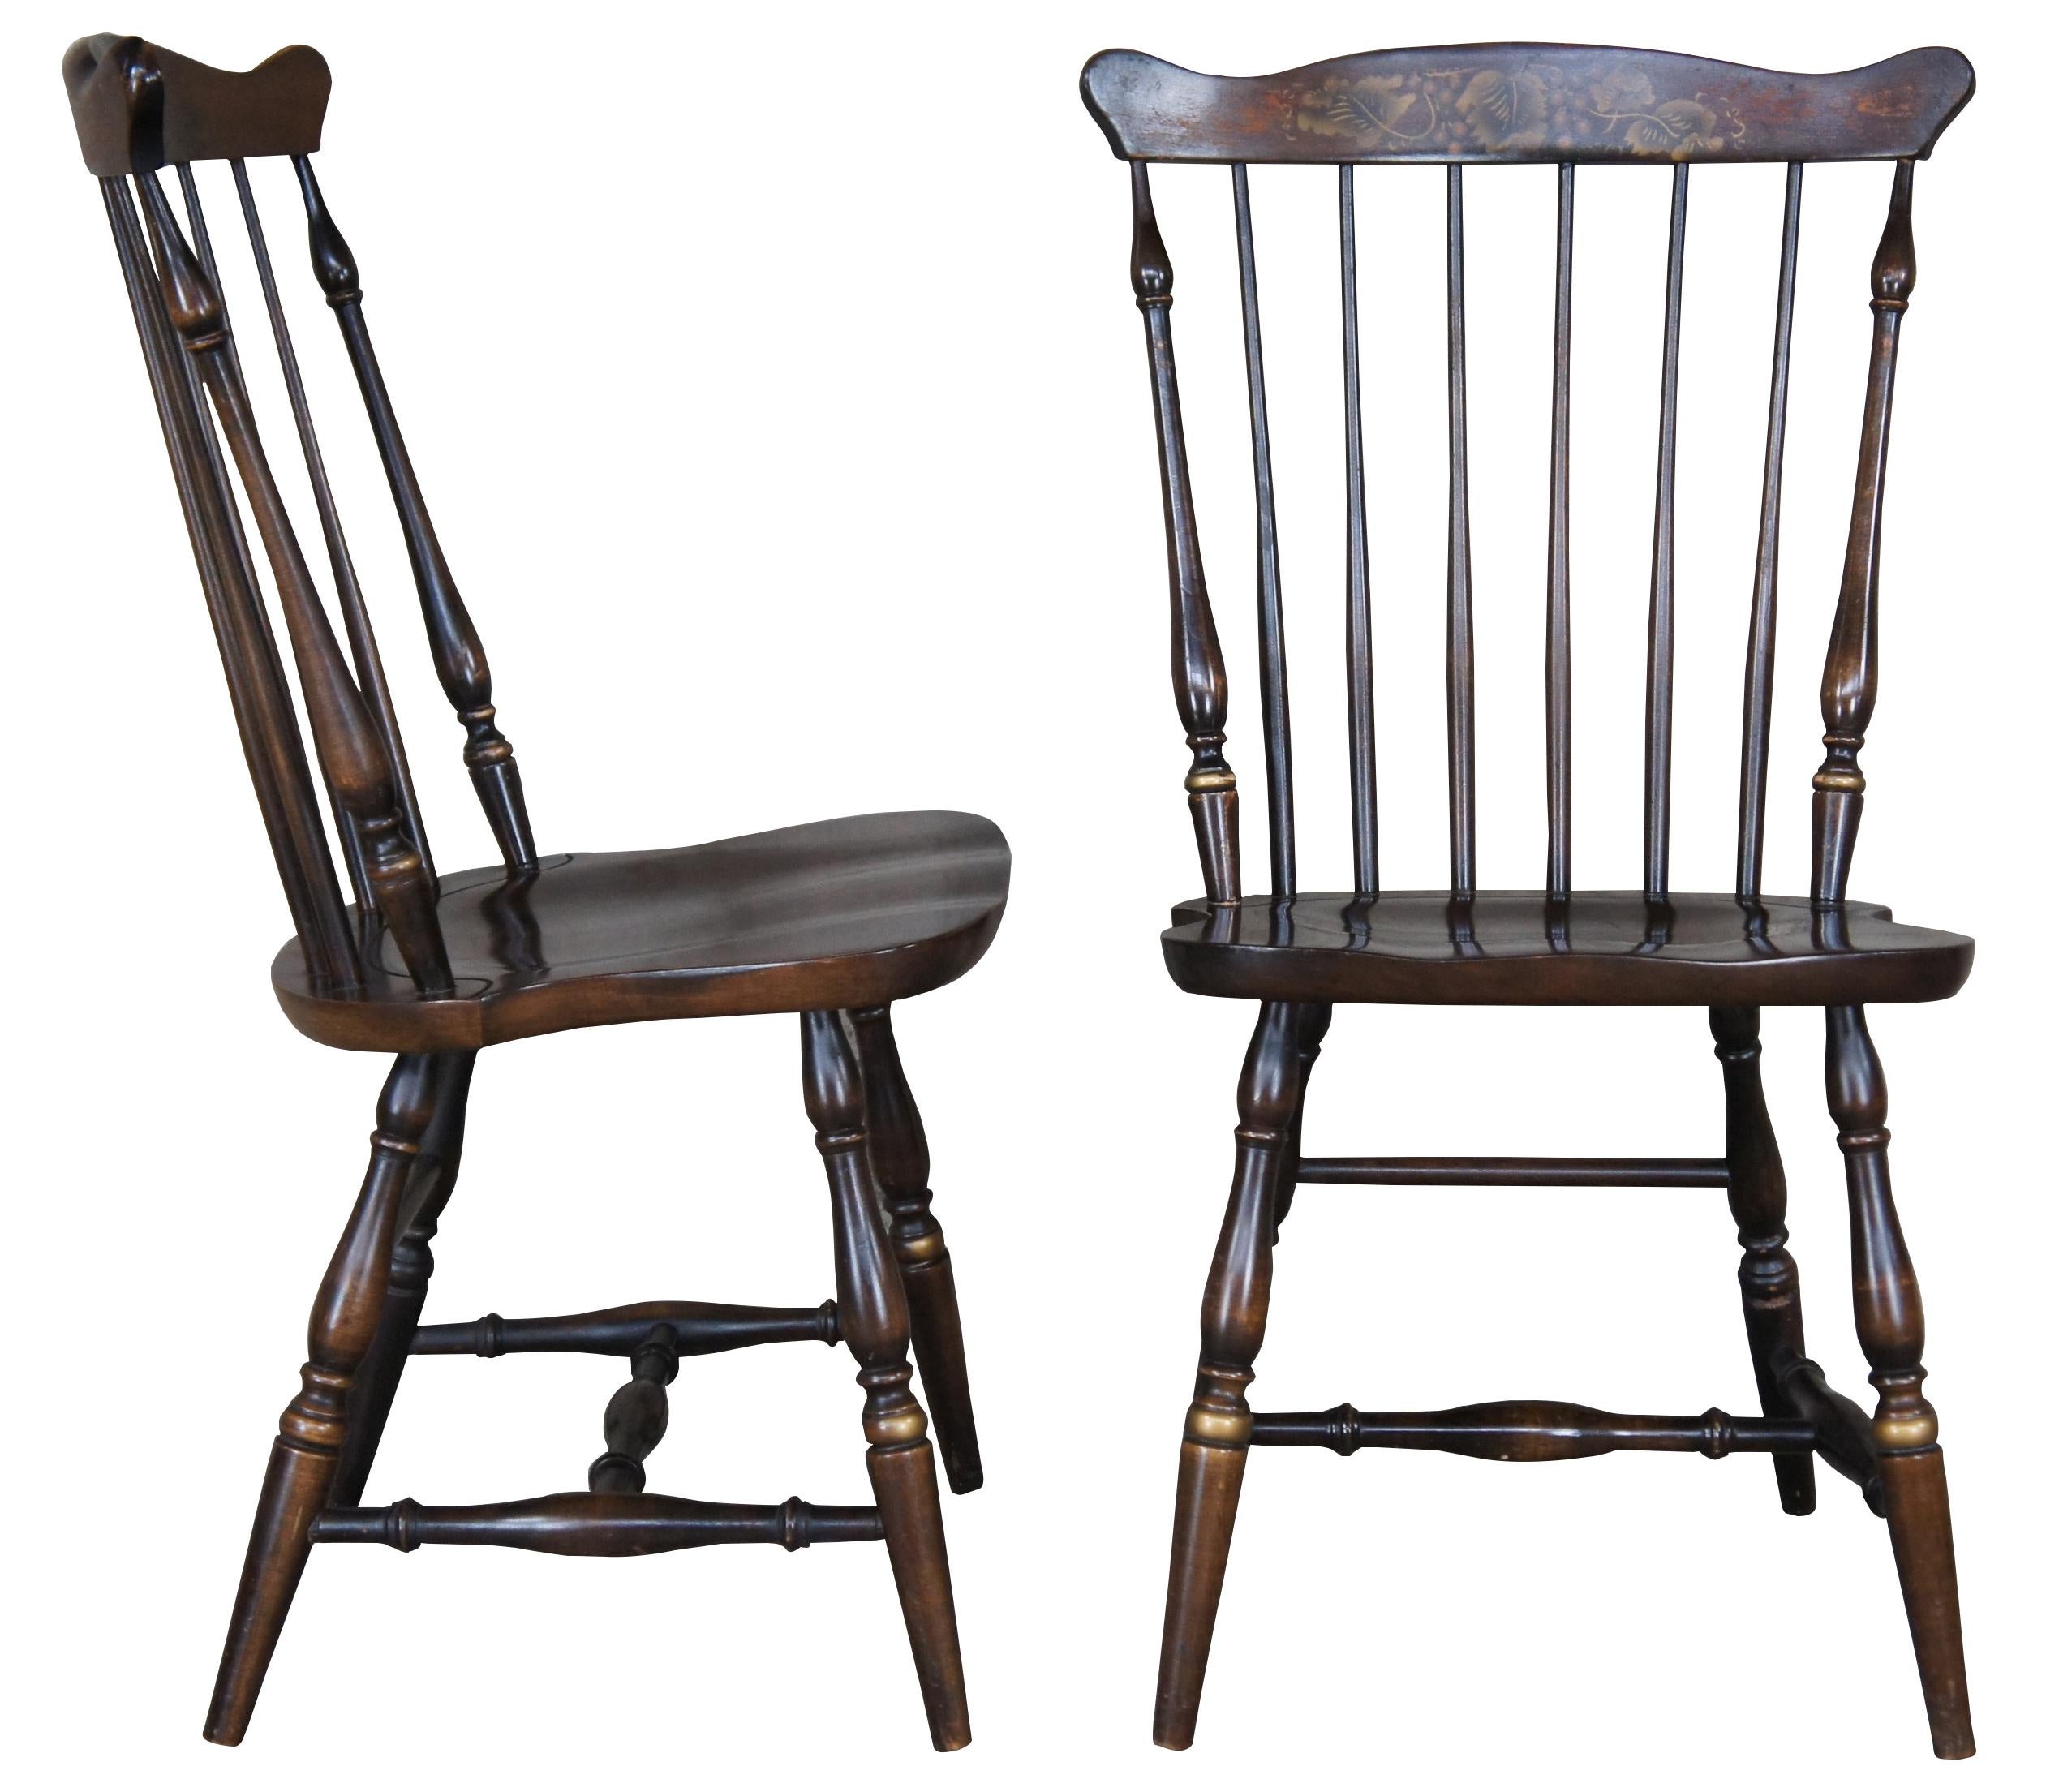 Six L. Hitchcock Harvest Windsor dining chairs. Made from maple with a stenciled fan back, contoured seat and gold trim.

The story of L. Hitcock begain in 1814 when 19-year-old Lambert Hitchcock of Chesire, Connecticut was apprenticed to Silas